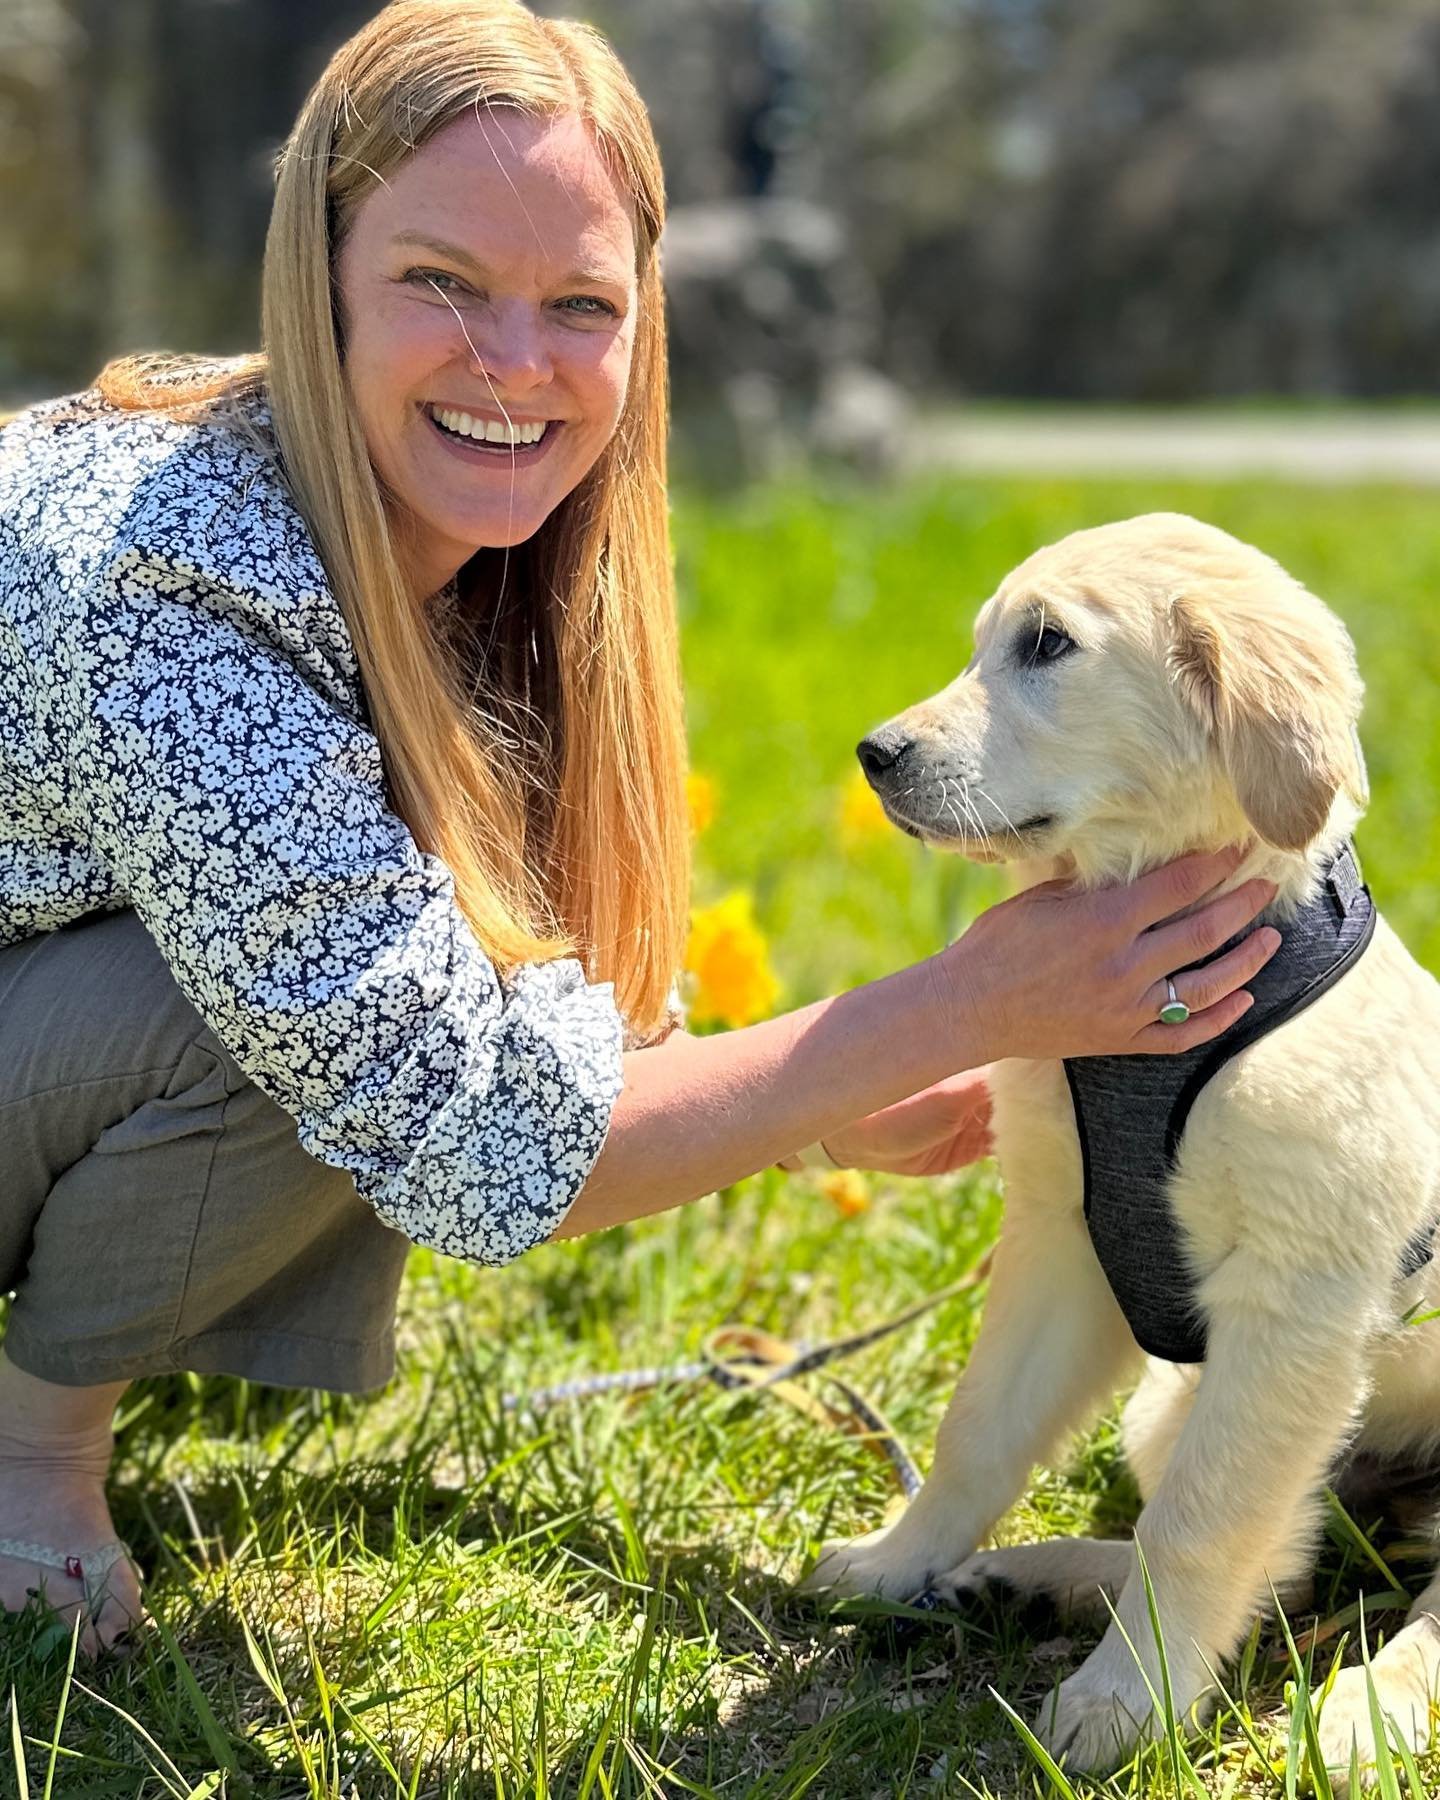 Howdy Neighbor❤️ Meet Murphy and long time High Falls native, Ingrid Frengle-Burke. Depending on the timing of his vaccinations, Murphy, who is a 15 week old Golden Retriever, may not make it to the Pet Show on May 11th😩